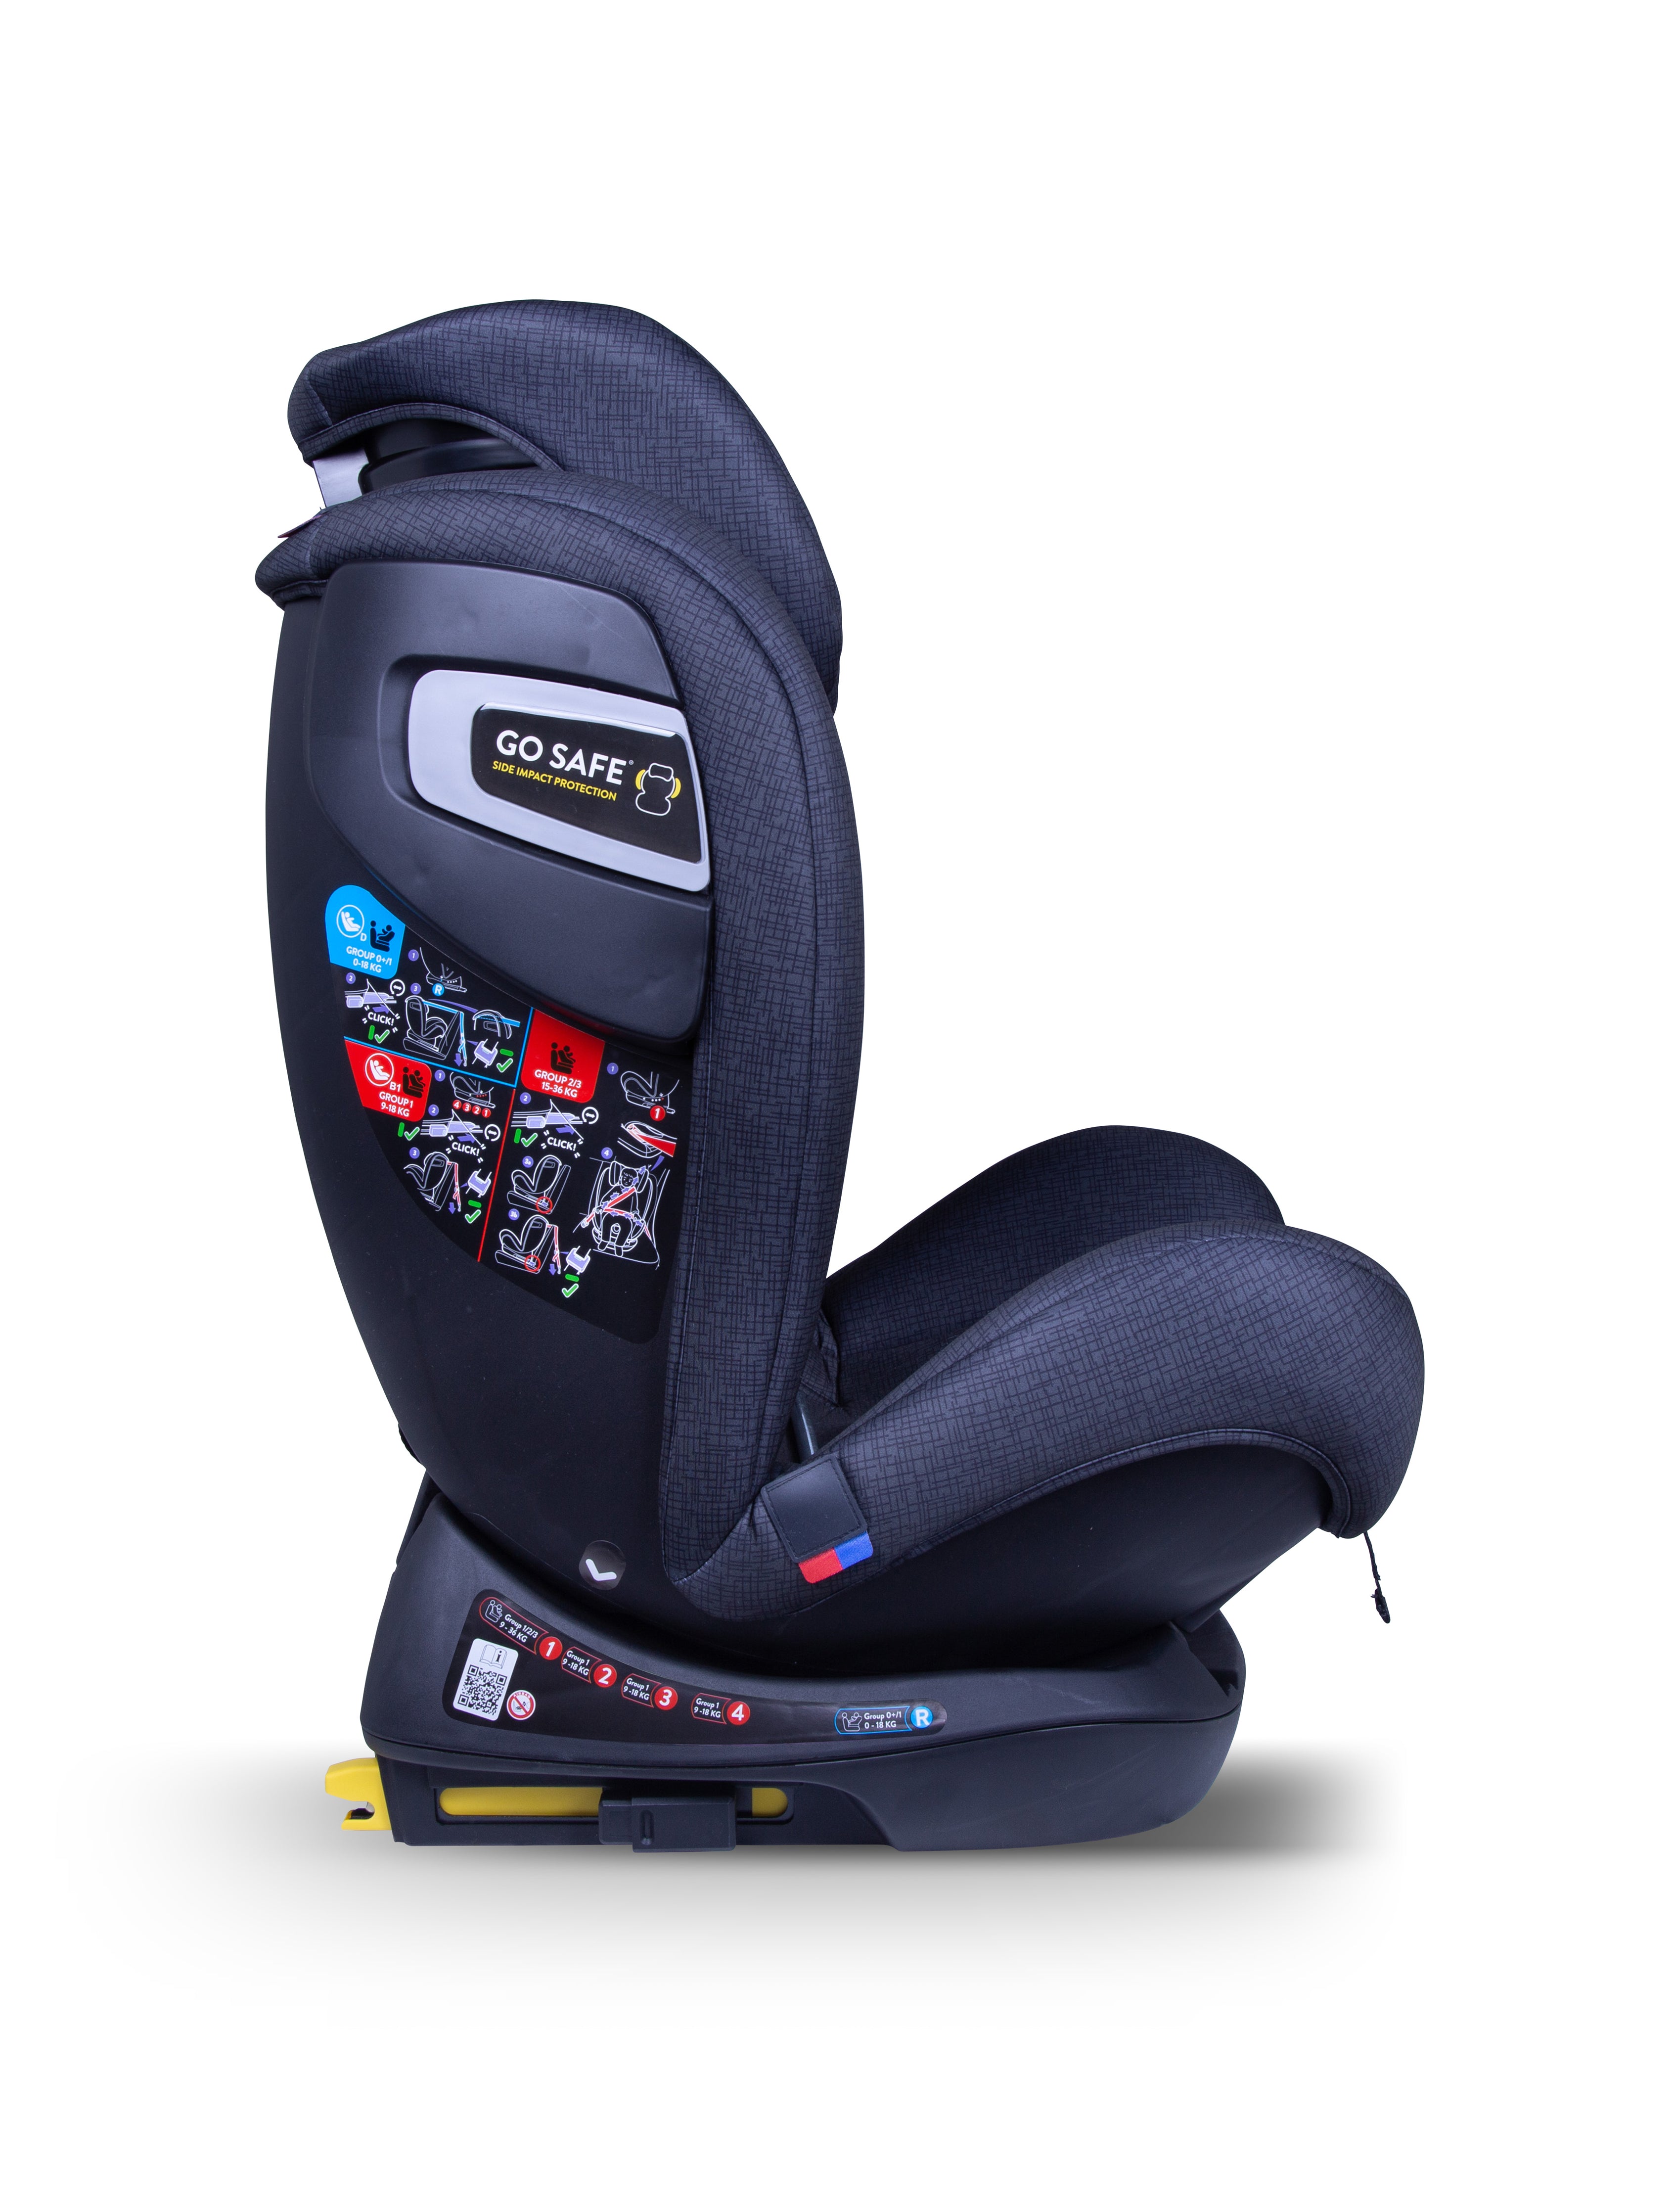 All in All + Group 0+123 Car Seat Spectroluxe